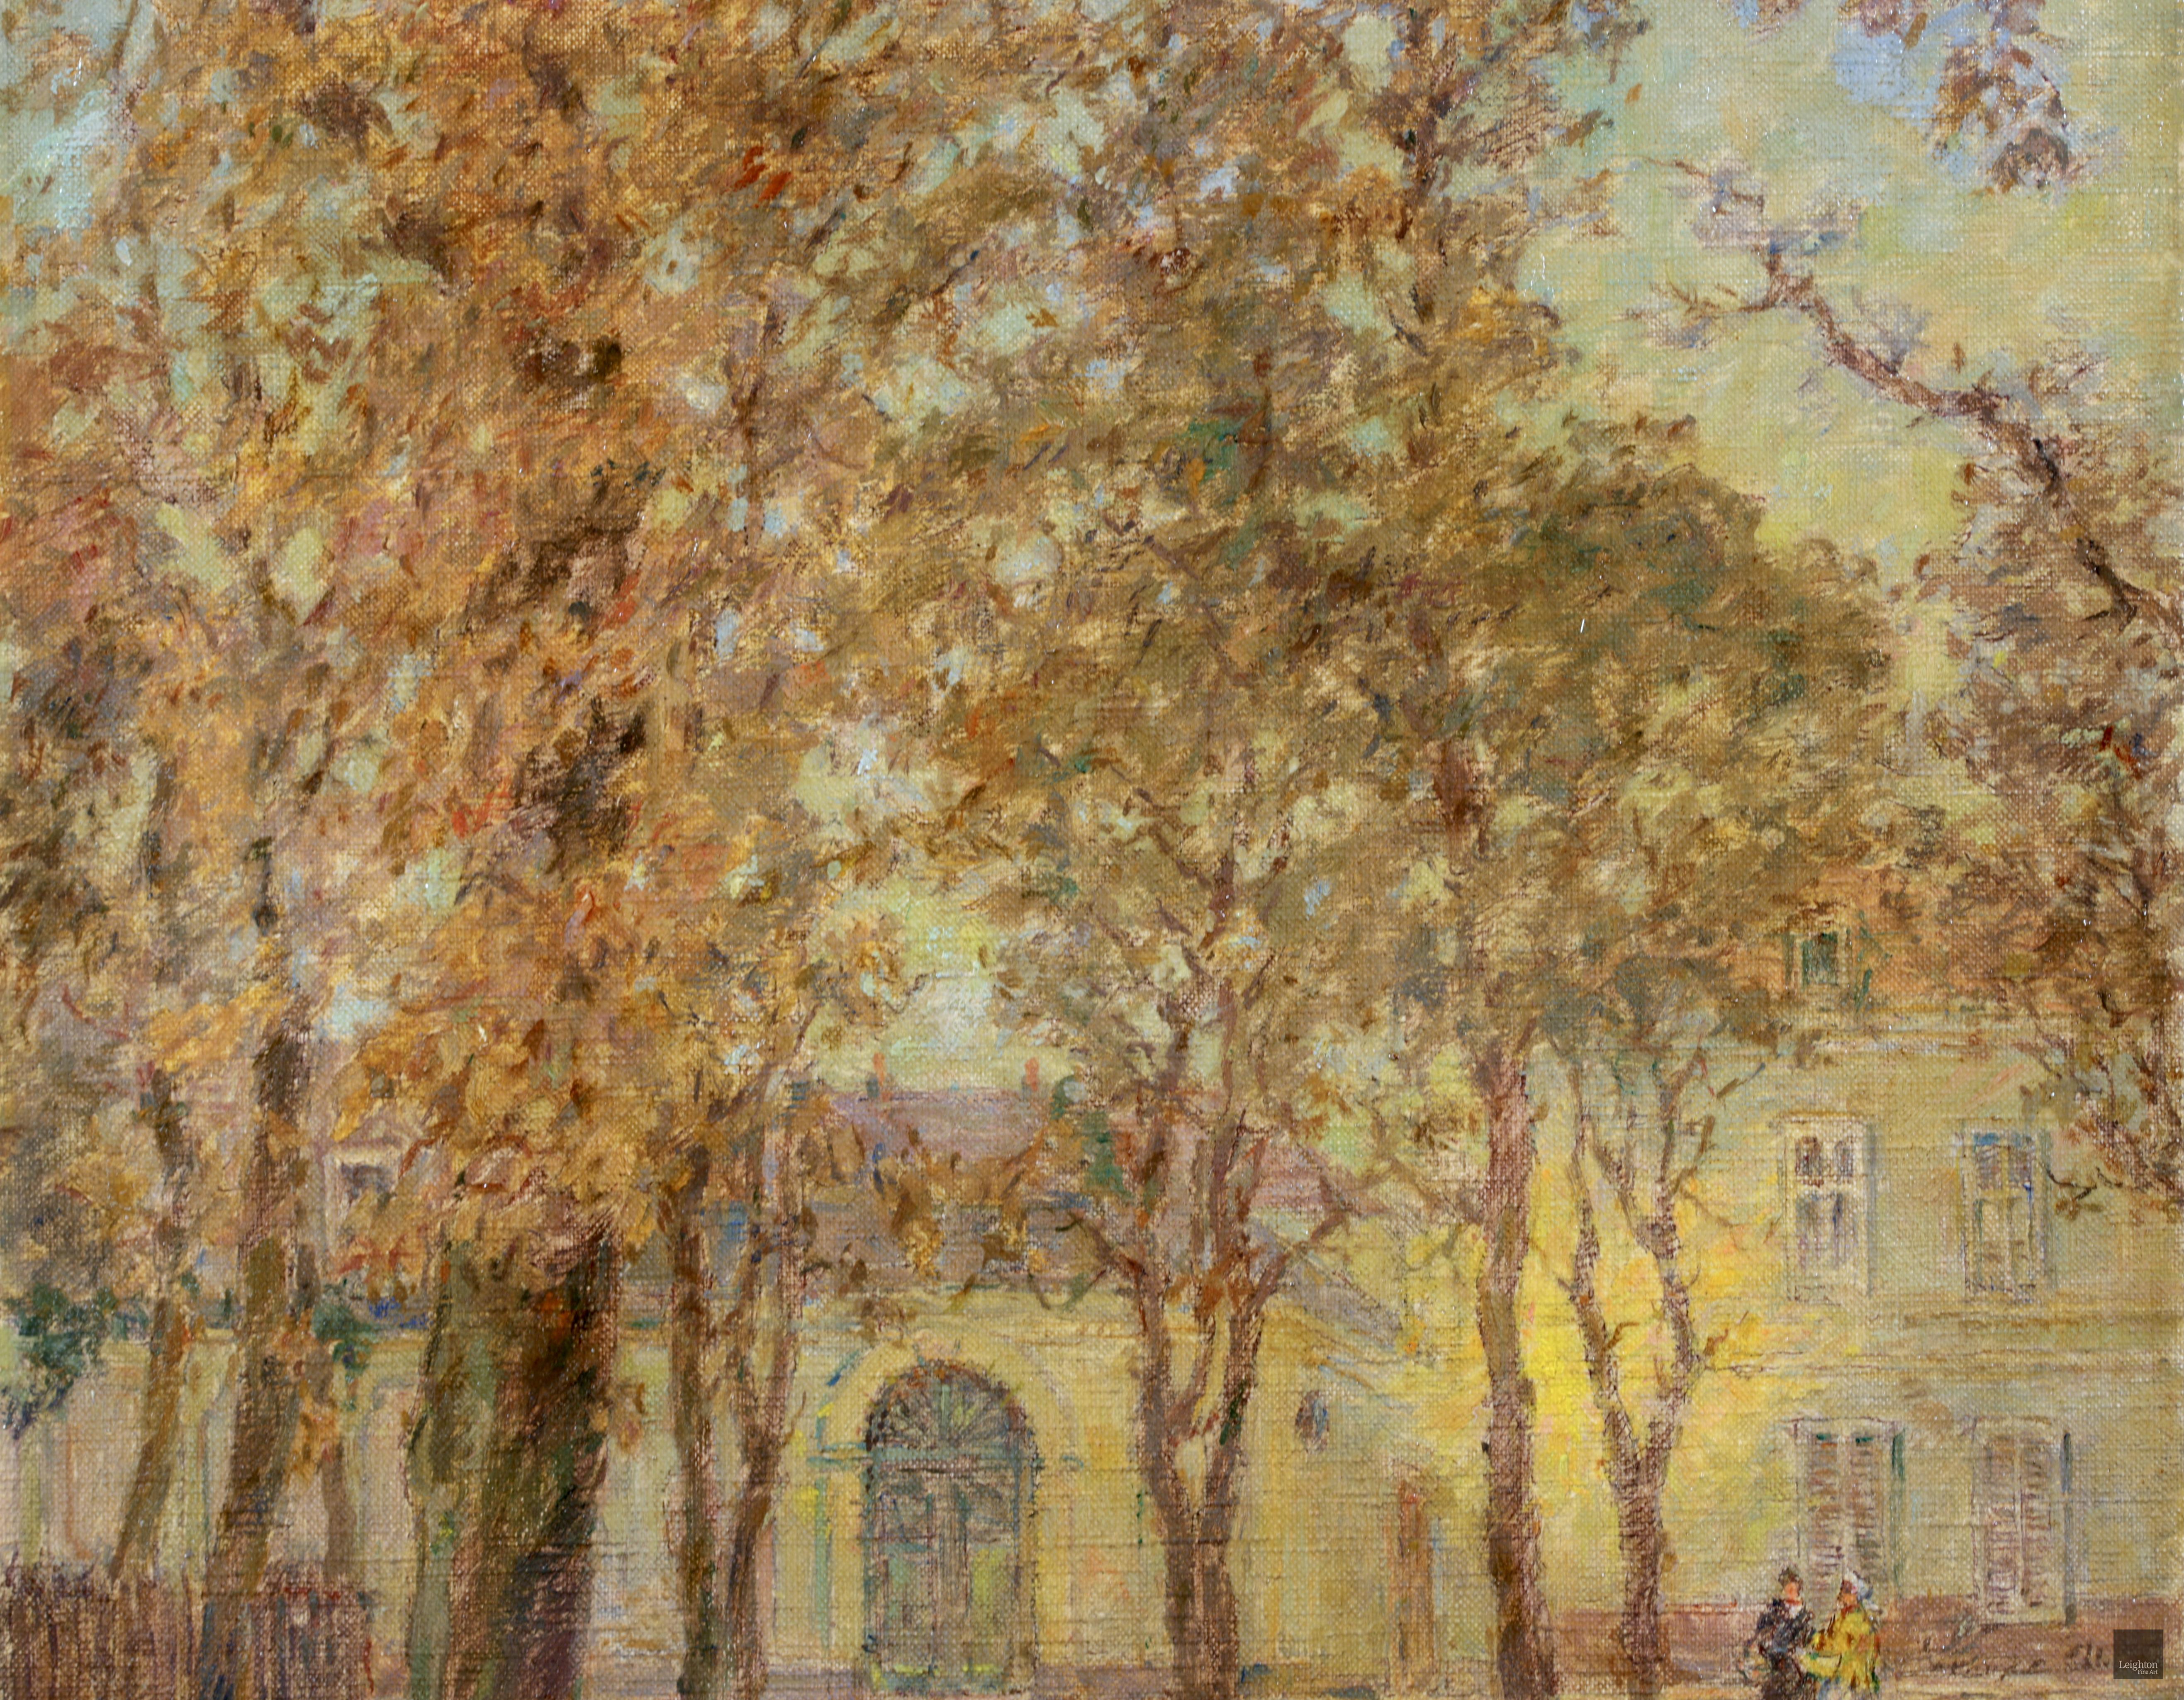 Signed and titled impressionist landscape oil on canvas circa 1910 by French painter Henri Duhem. The work depicts a view of Place Sainte-Ame, Douai in the north of France. It is autumn and the orange, yellow and brown leaves are scattered on the